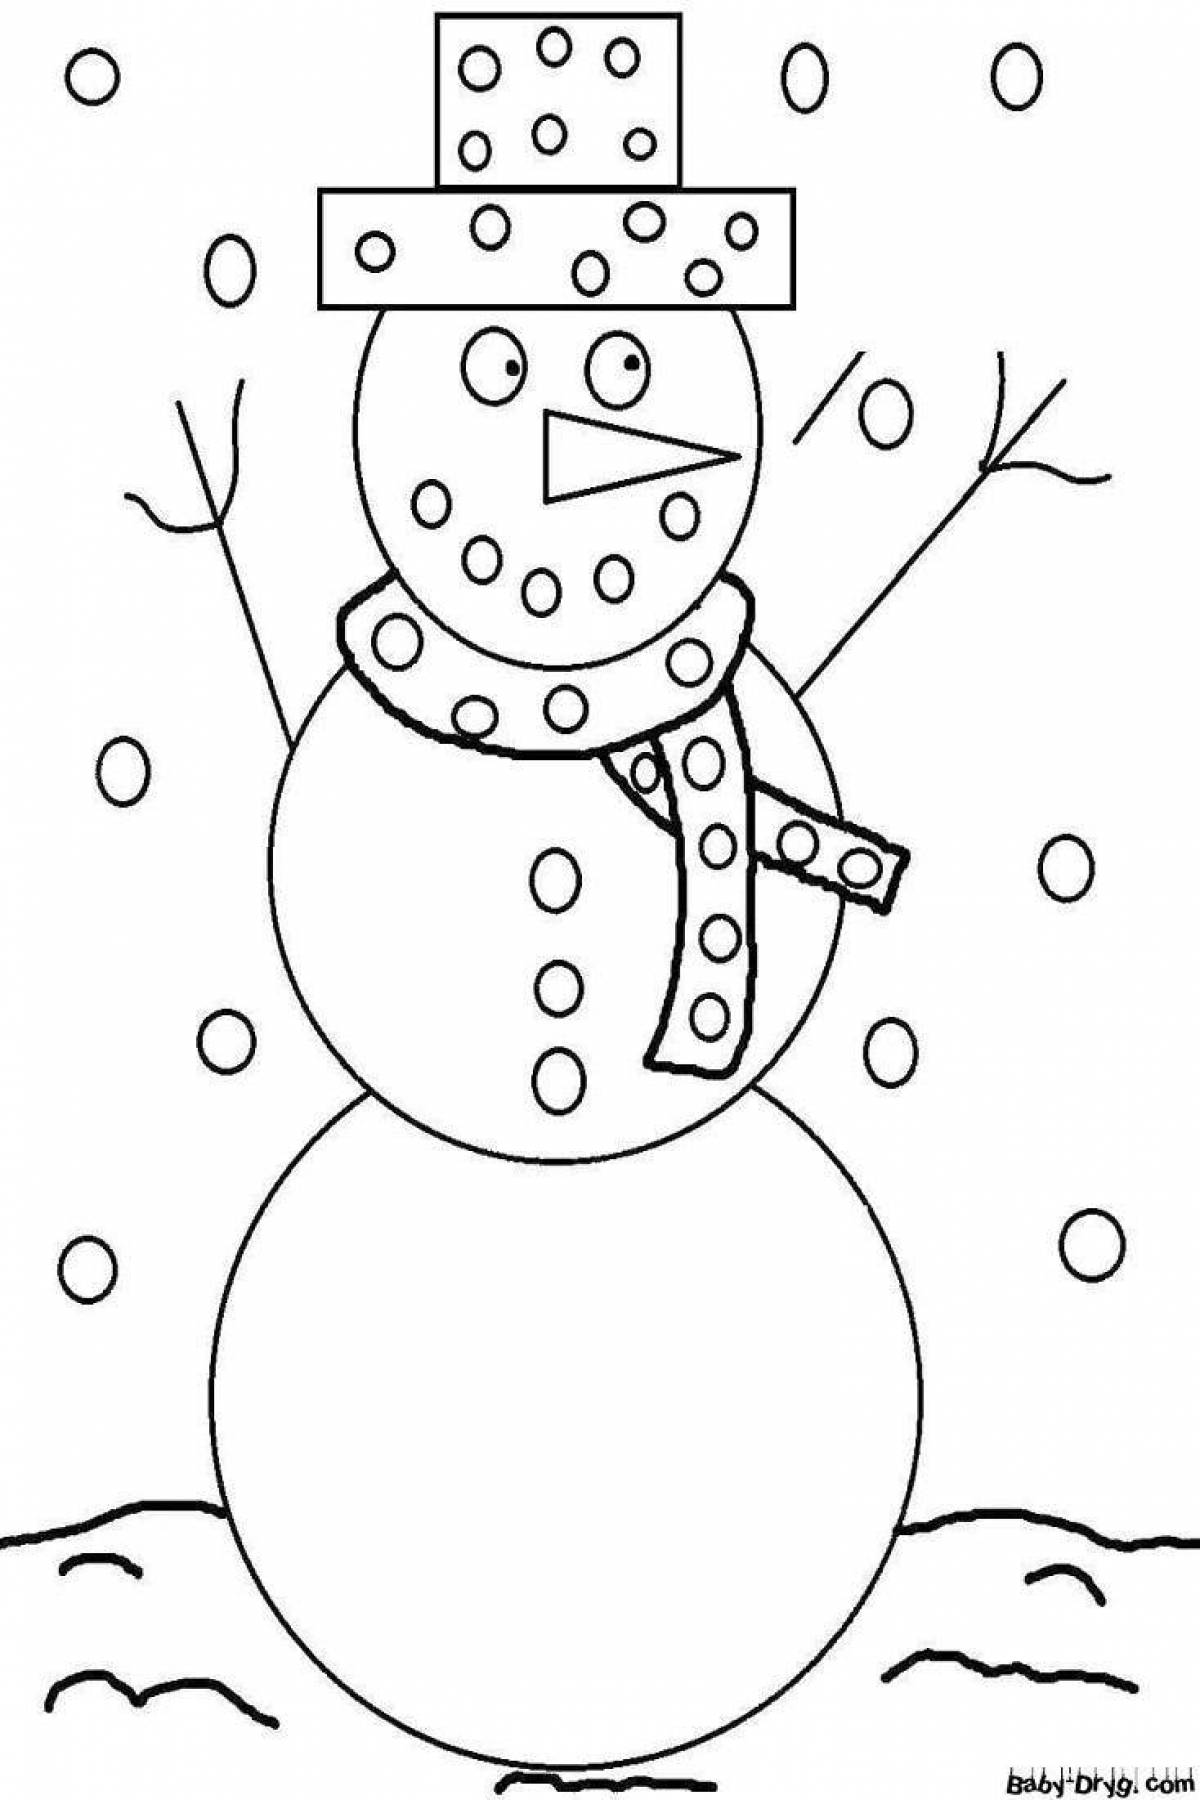 Bright coloring snowman for children 6-7 years old